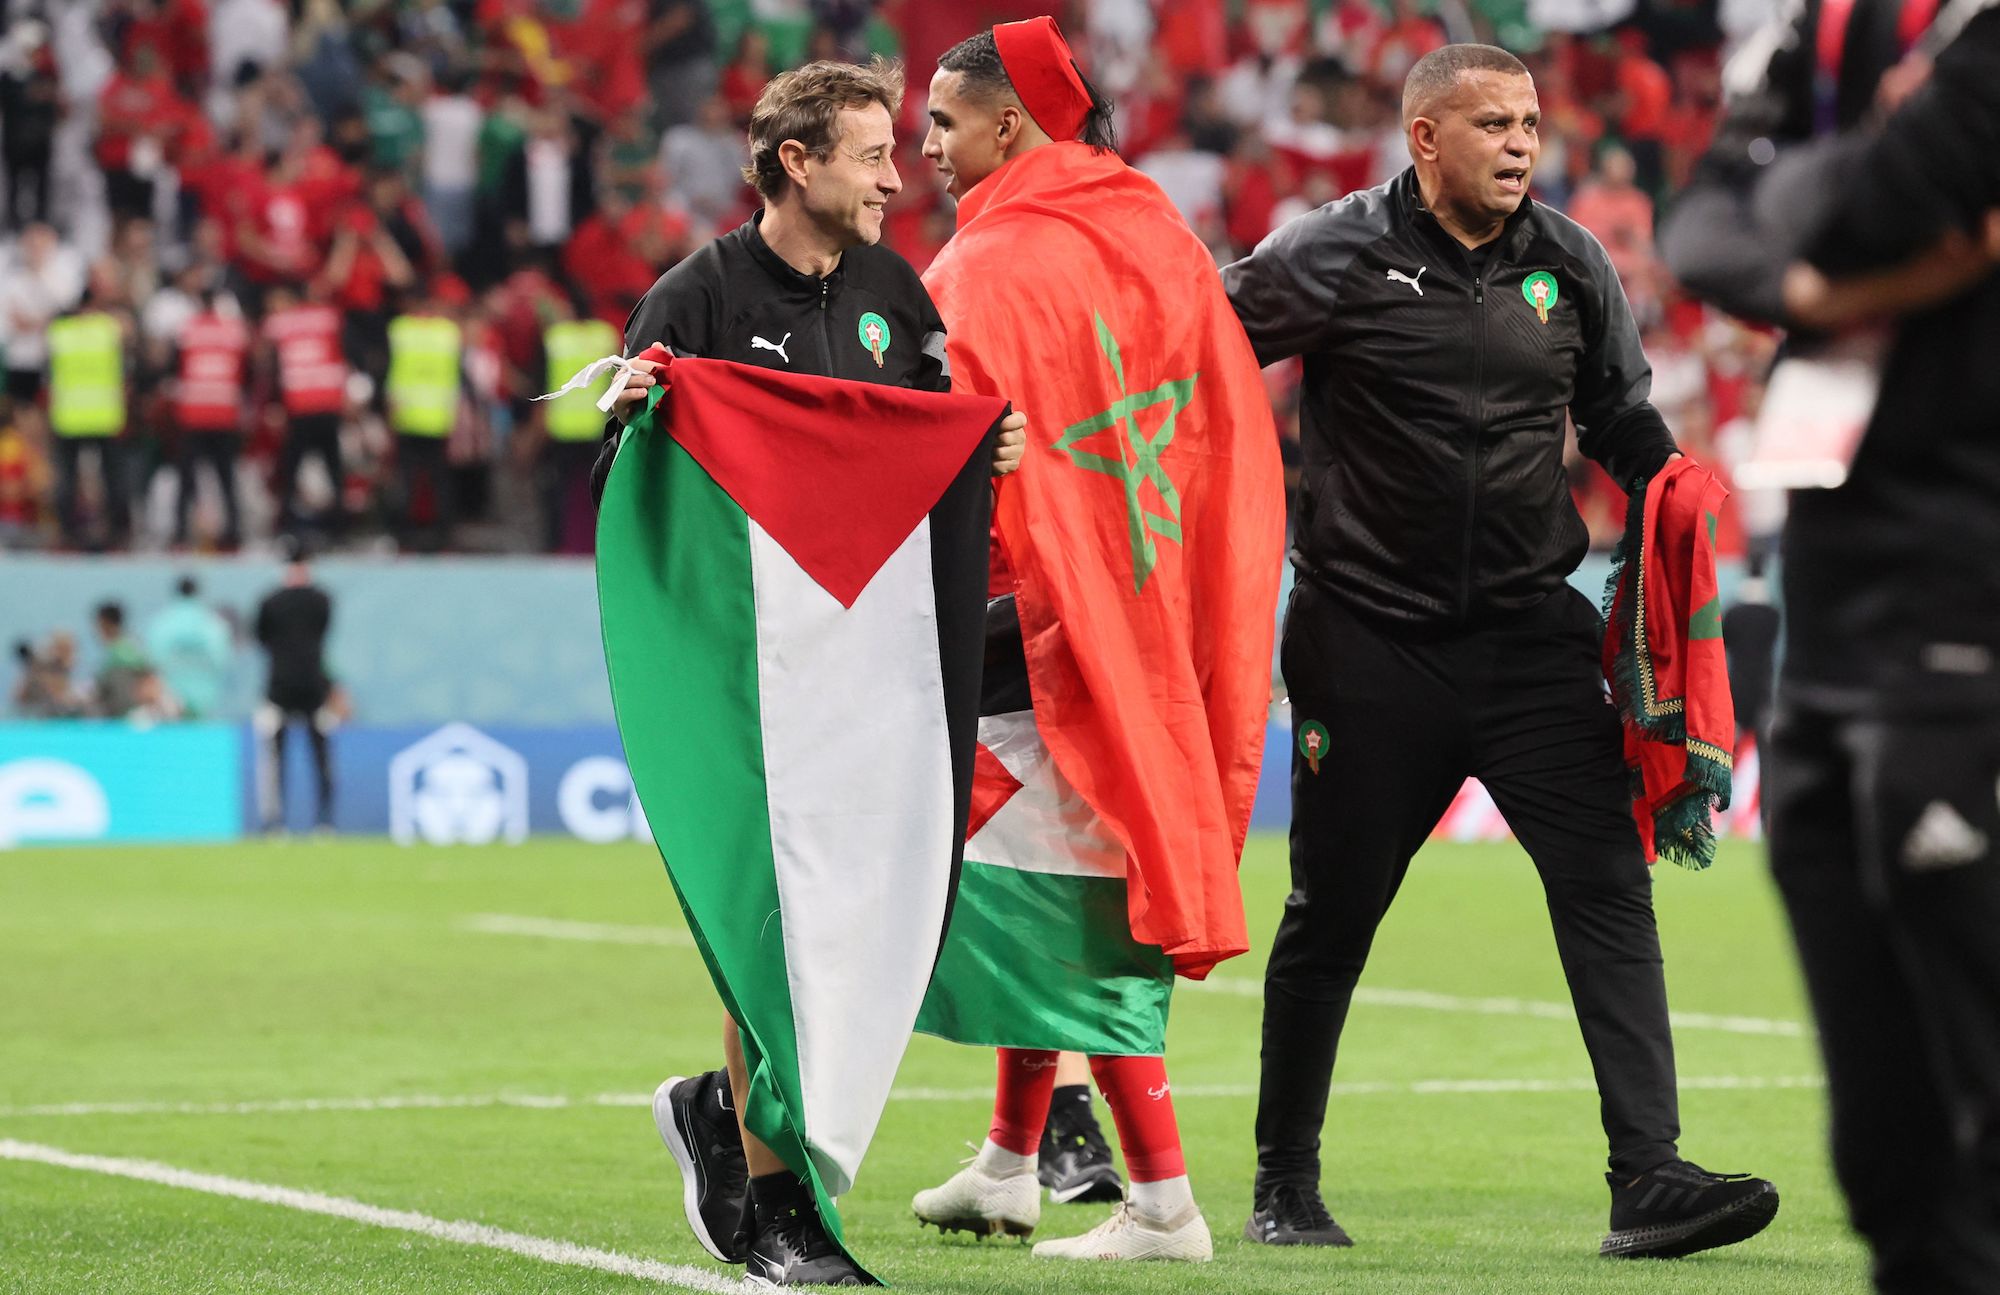 A member of Morocco's team holds a Palestinian flag after the team won the penalty shoot-out to win the Qatar 2022 World Cup round of 16 football match between Morocco and Spain at the Education City Stadium in Al-Rayyan, west of Doha on December 6, 2022.